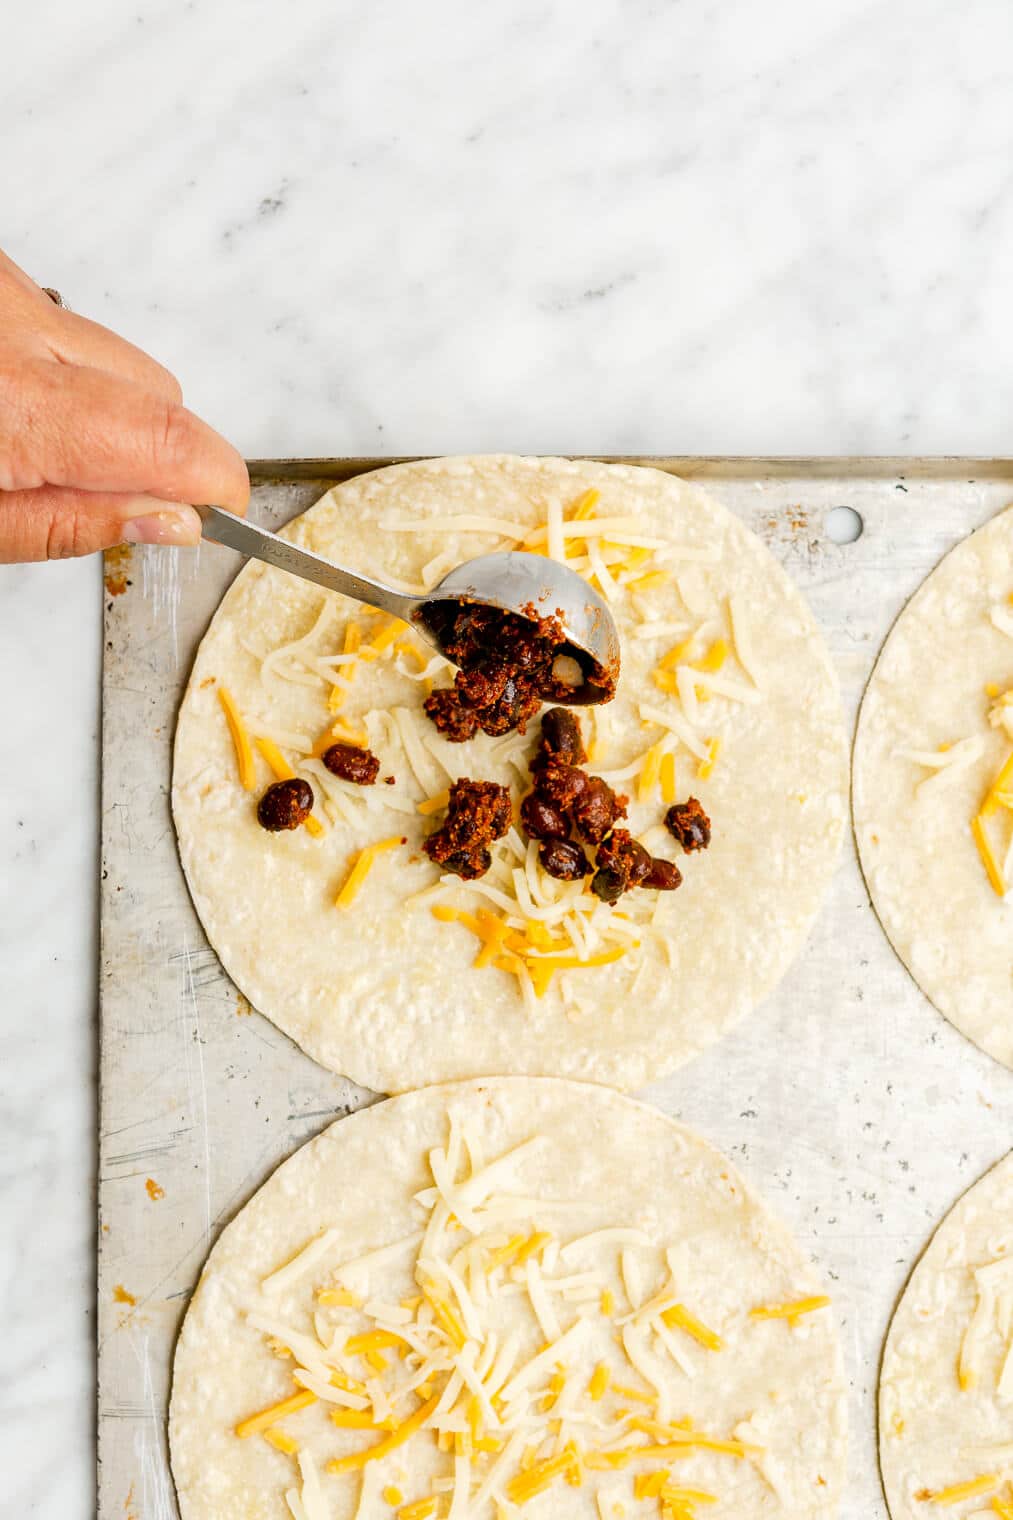 A hand scooping a tablespoon of black beans over top of shredded cheese on a corn tortilla on a metal sheet pan.